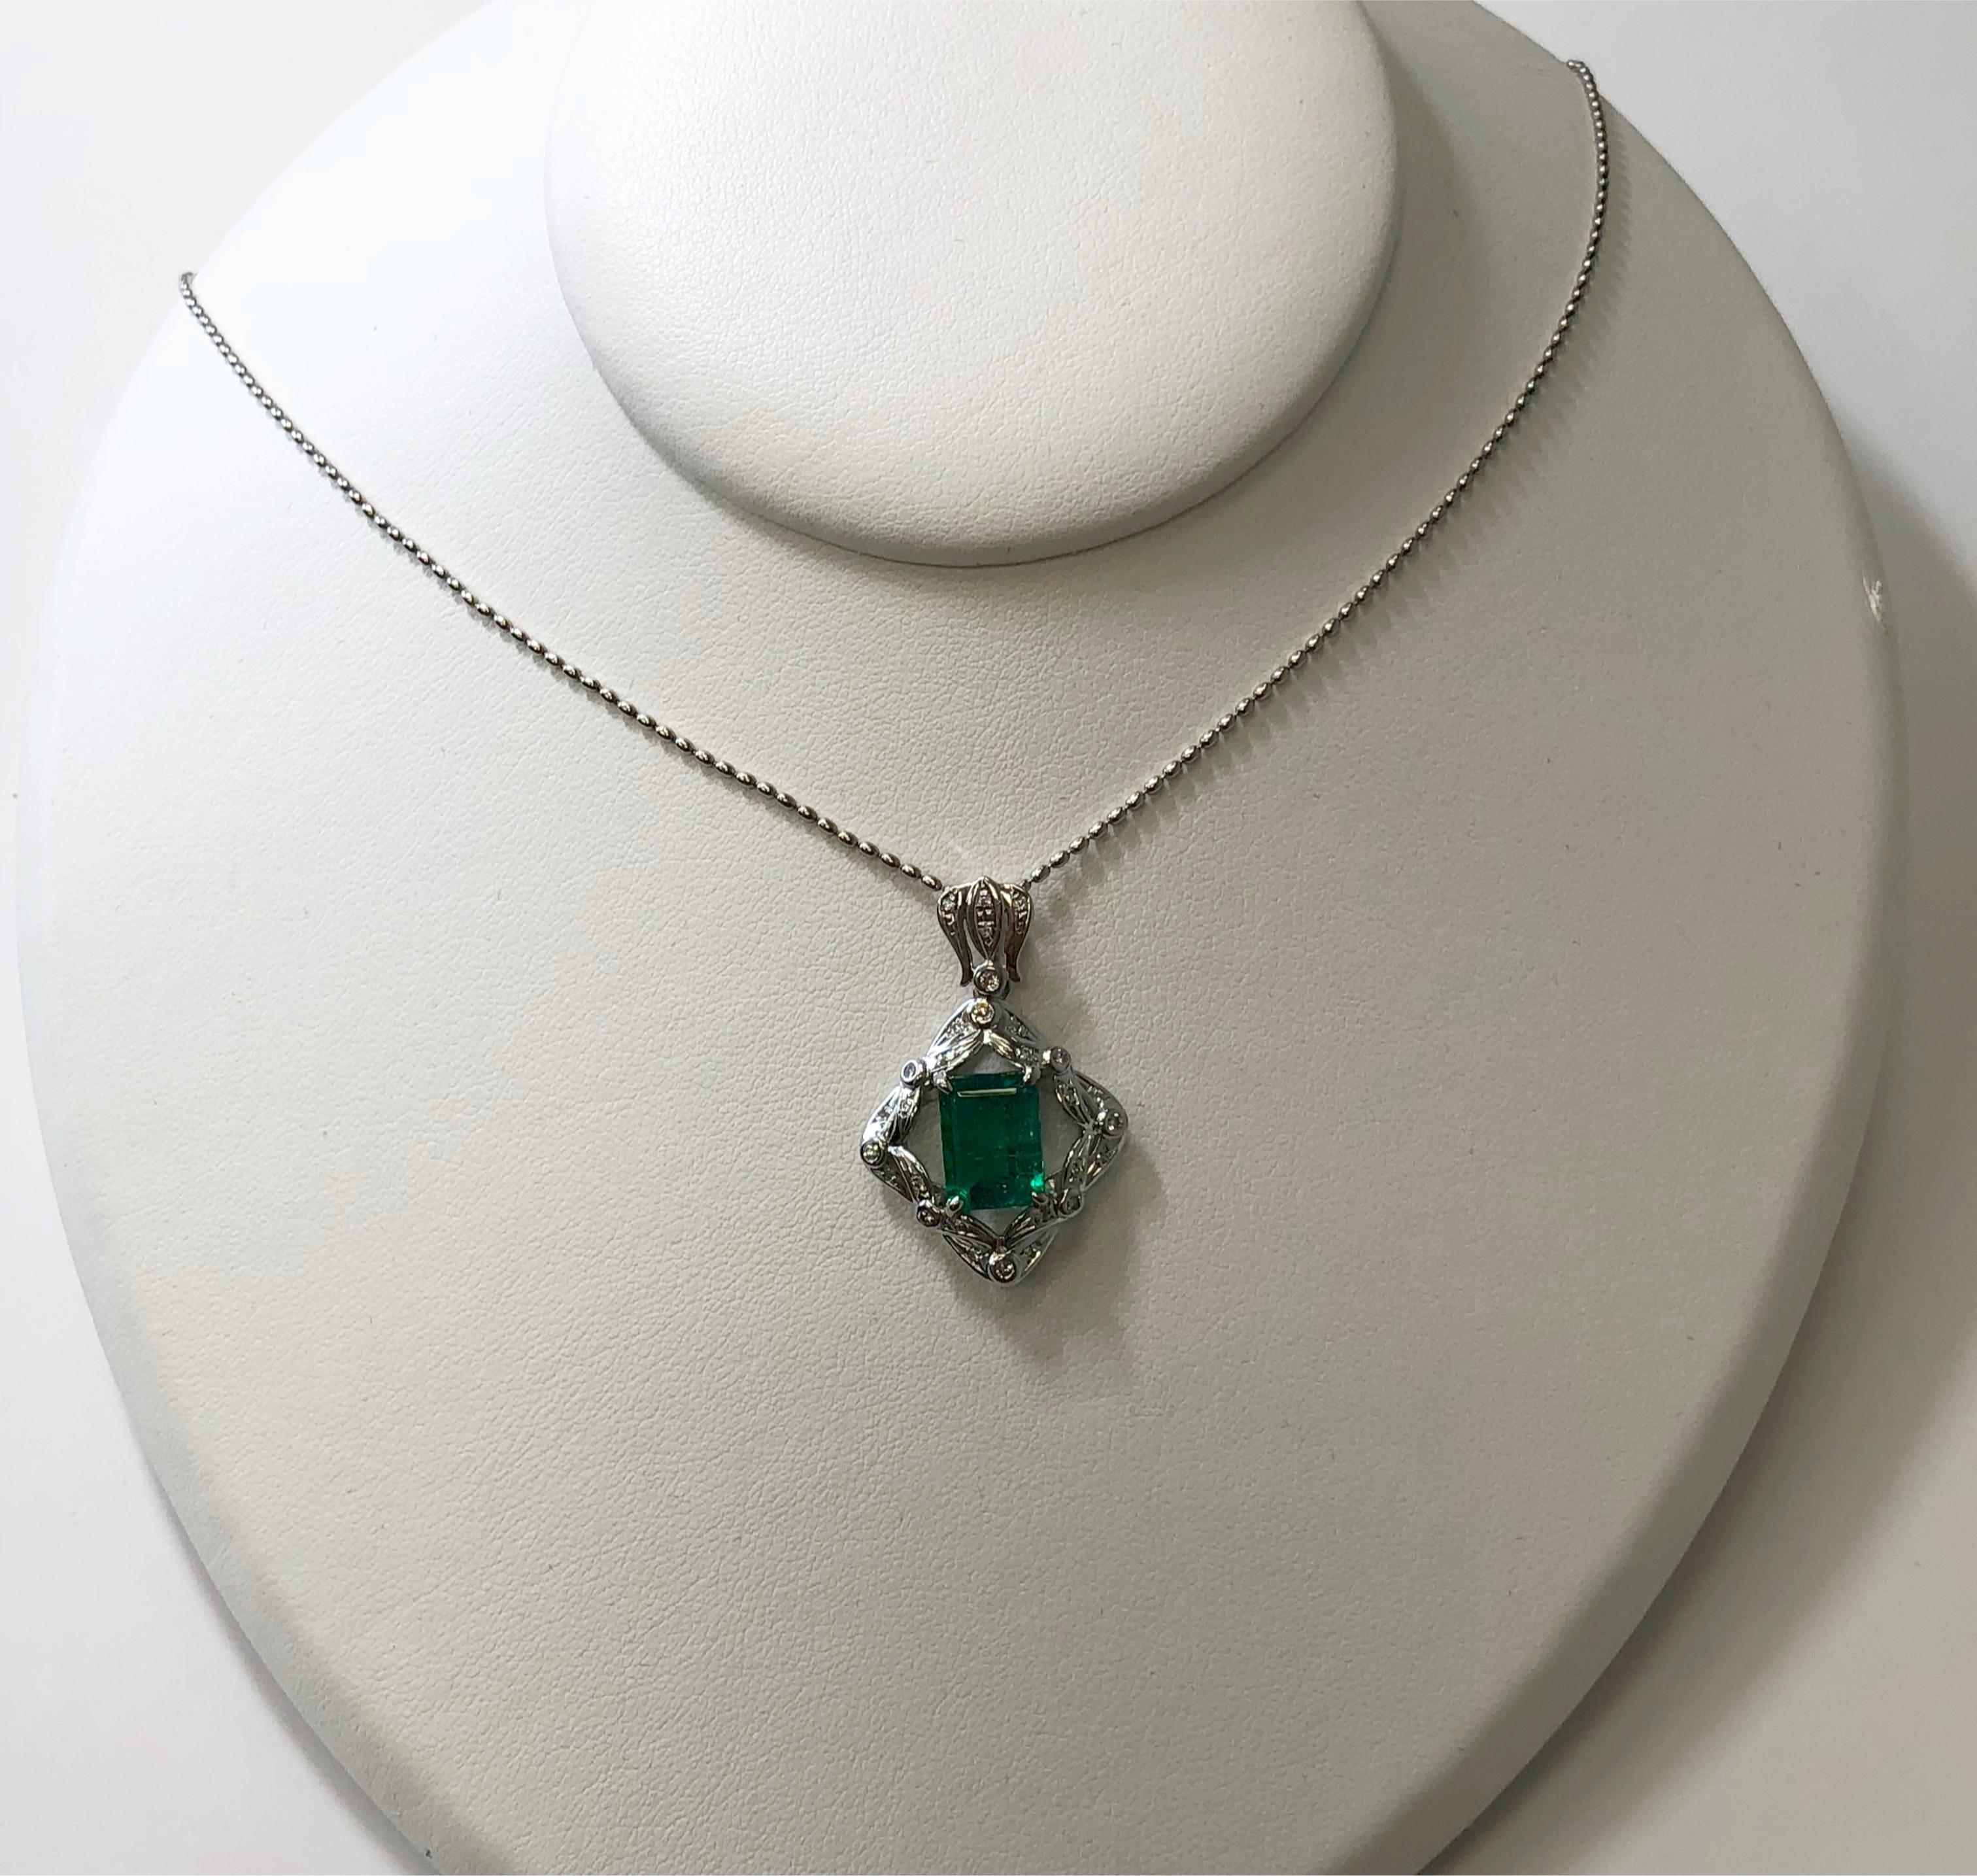 This beautiful Old English inspired emerald and diamond necklace has a 3.05 ct emerald cut emerald with a rich green crystal and gorgeous luster.  The diamond weight is 0.27 ct on an 18 inch chain.  Perfect for everyday or a special occasion!